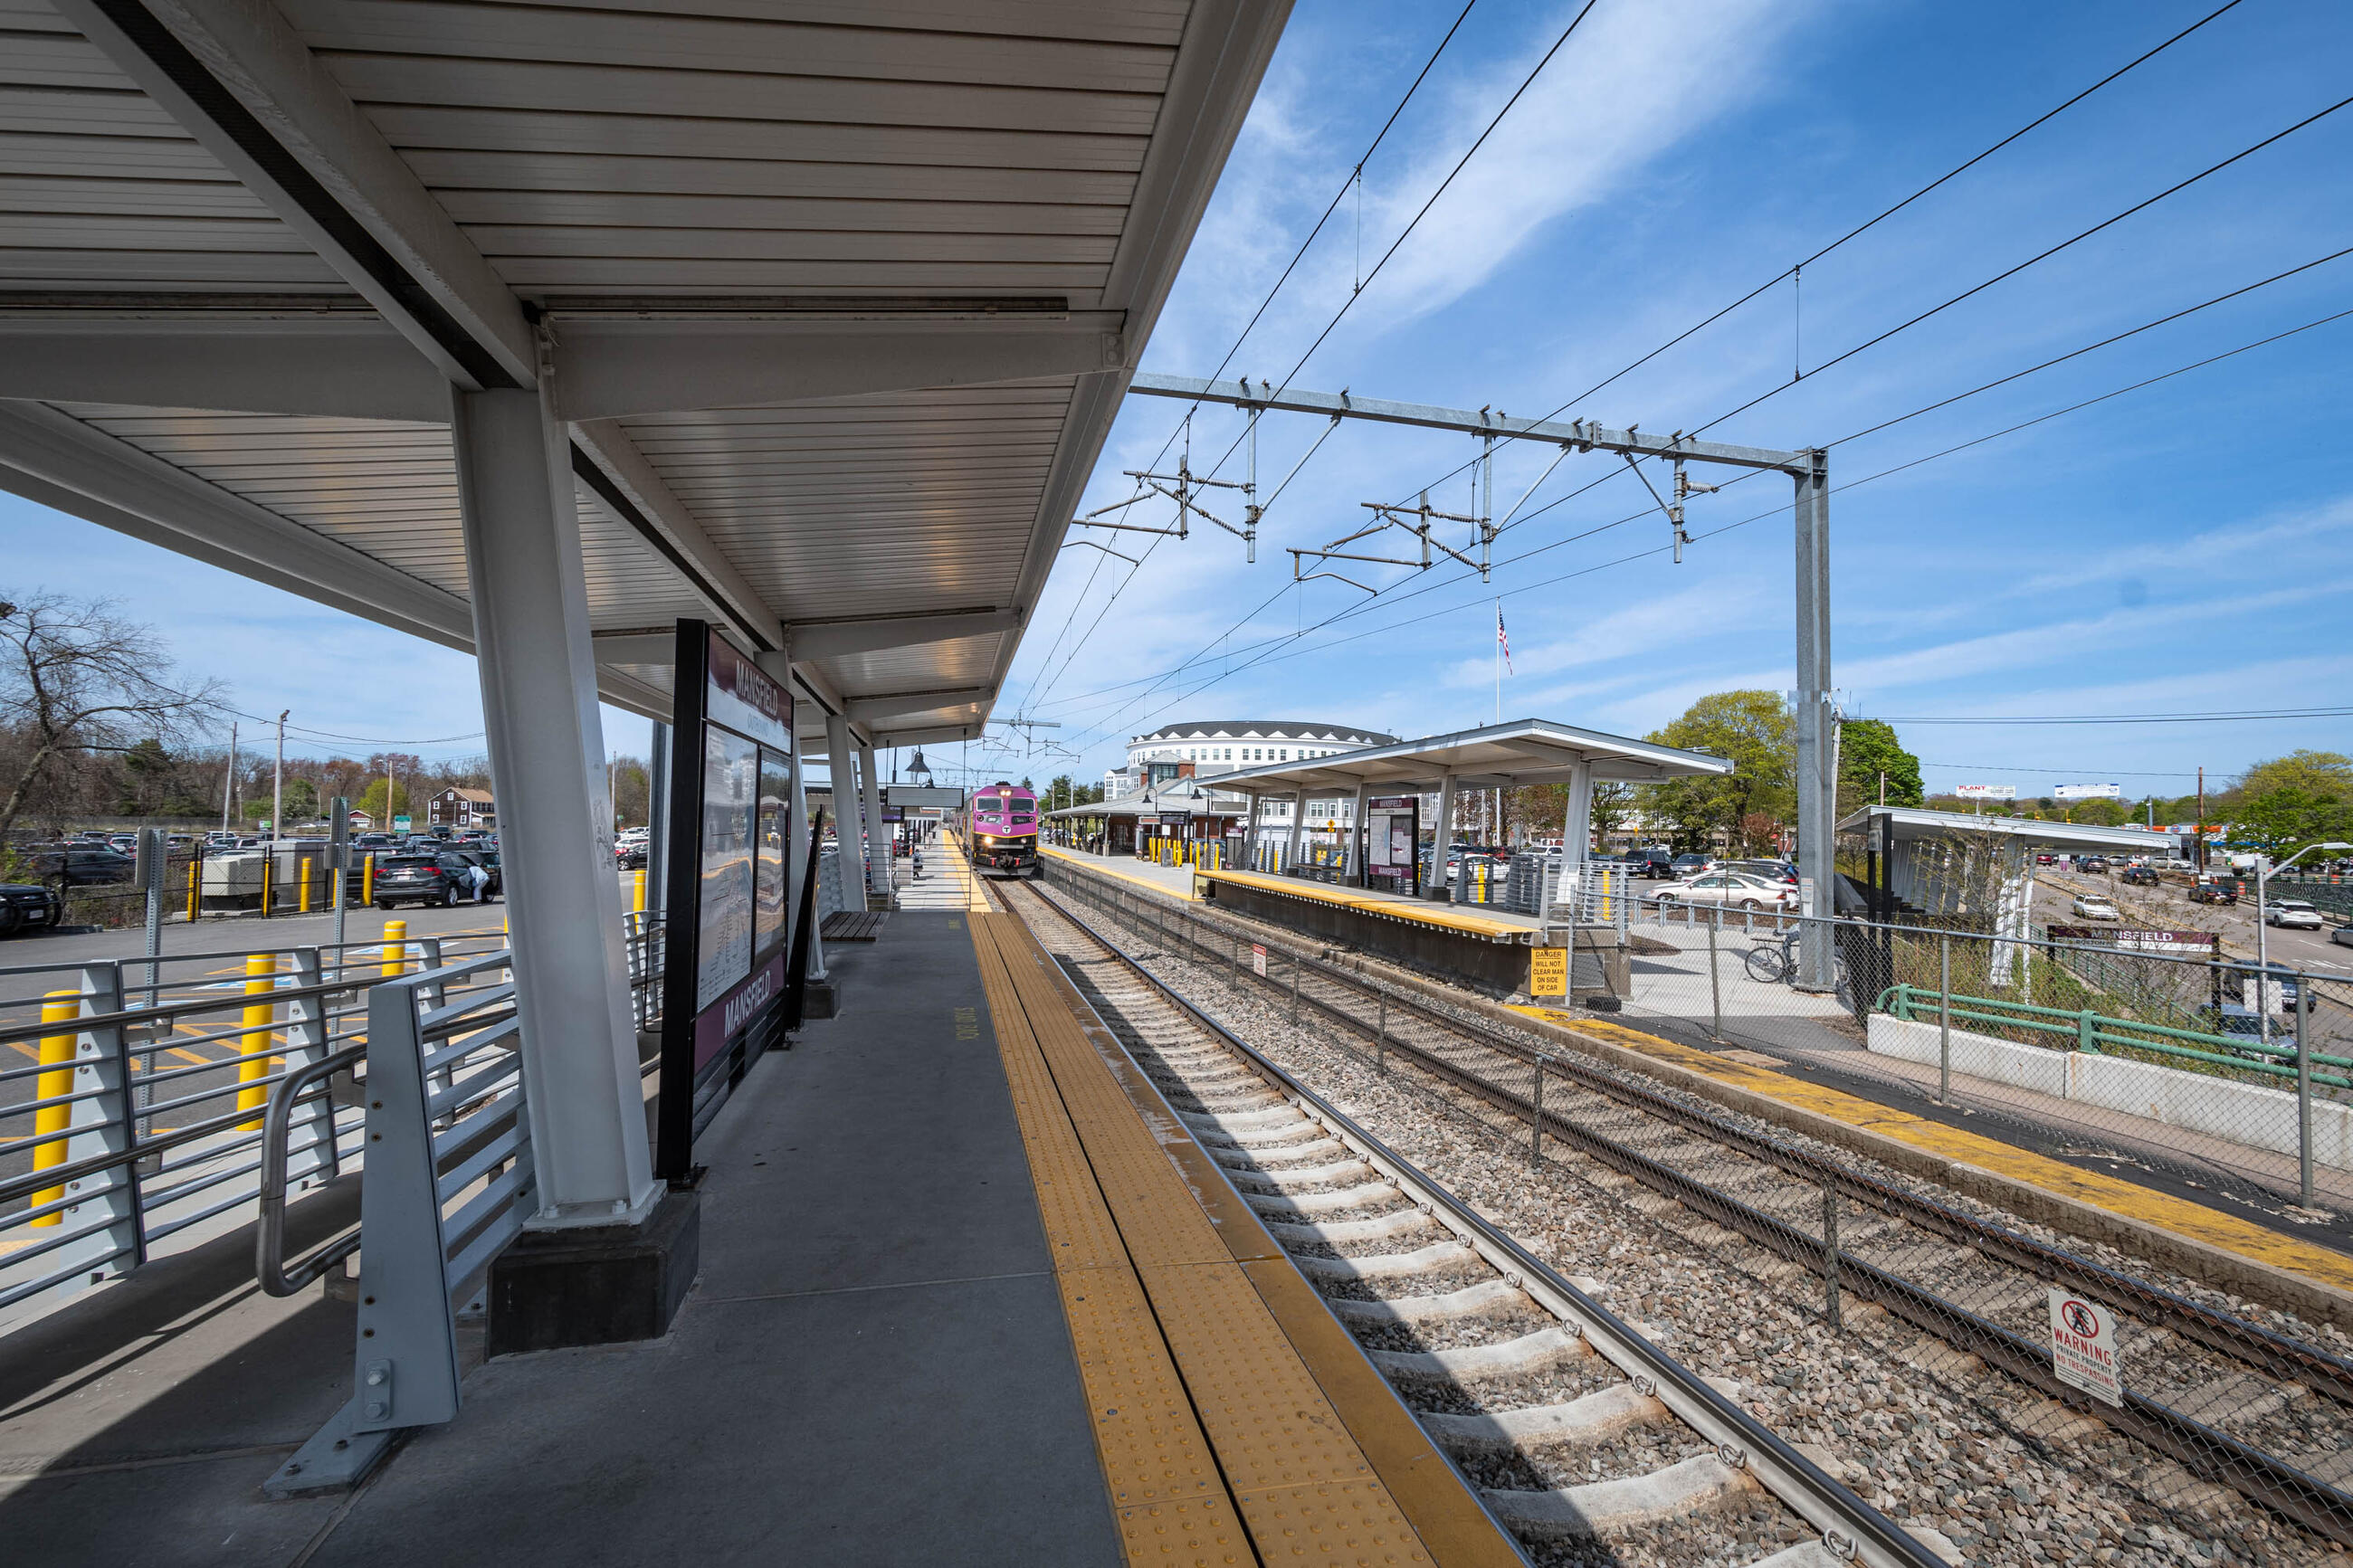 A wide view of Mansfield station shortly after its accessibility upgrades were completed. The photo shows a long view of the outbound platform at left, with a train approaching. The track runs from the center to the lower right corner. The inbound platform is shown at right. 